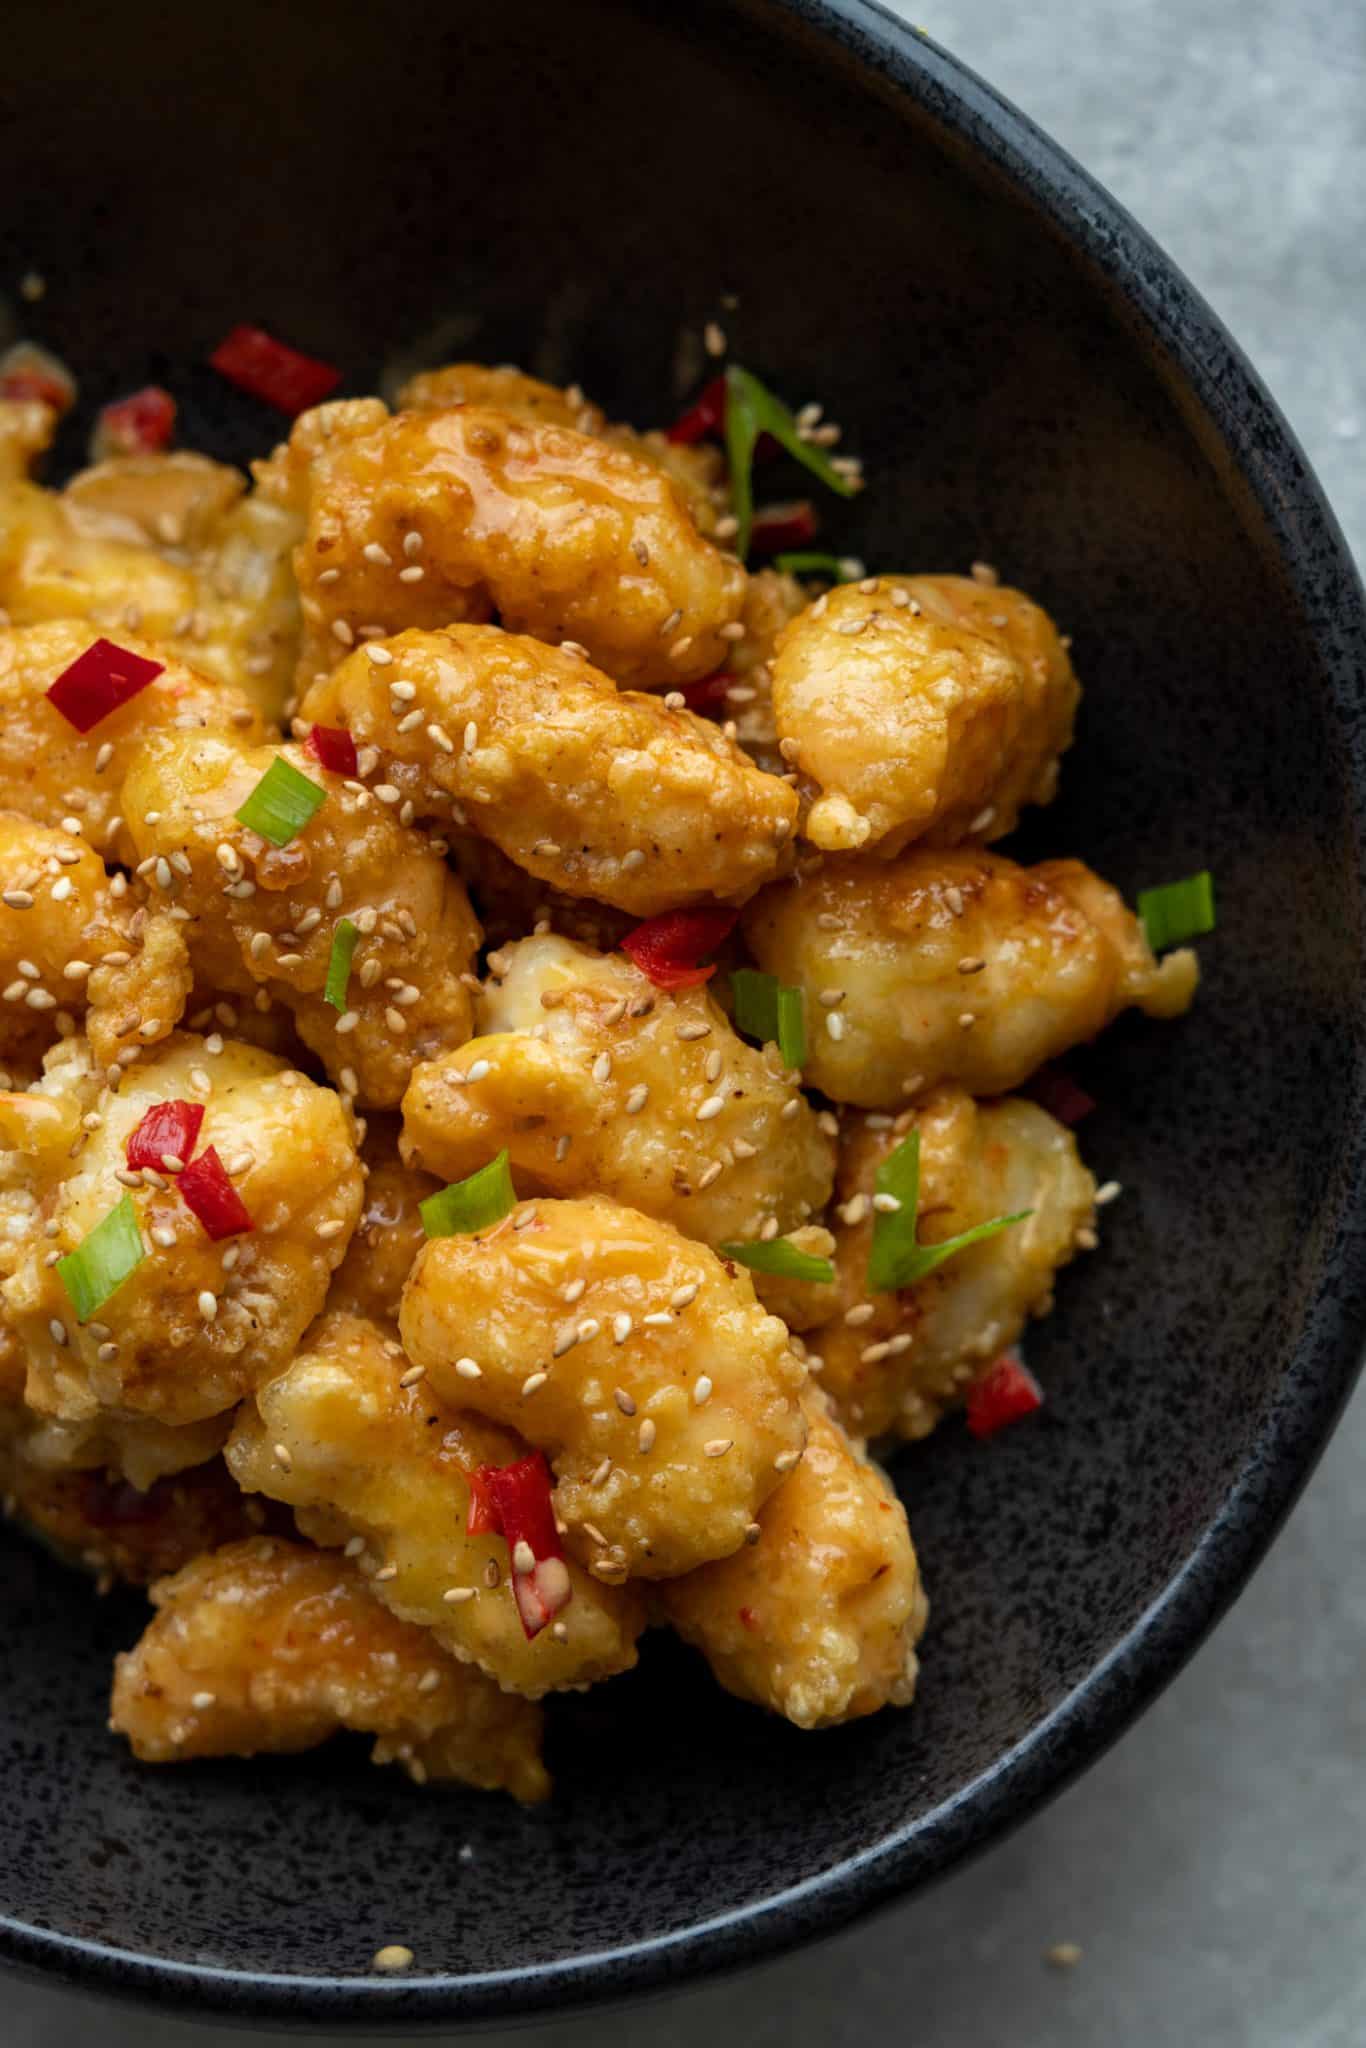 coated shrimp tossed in a sweet Thai chili sauce served in a bowl